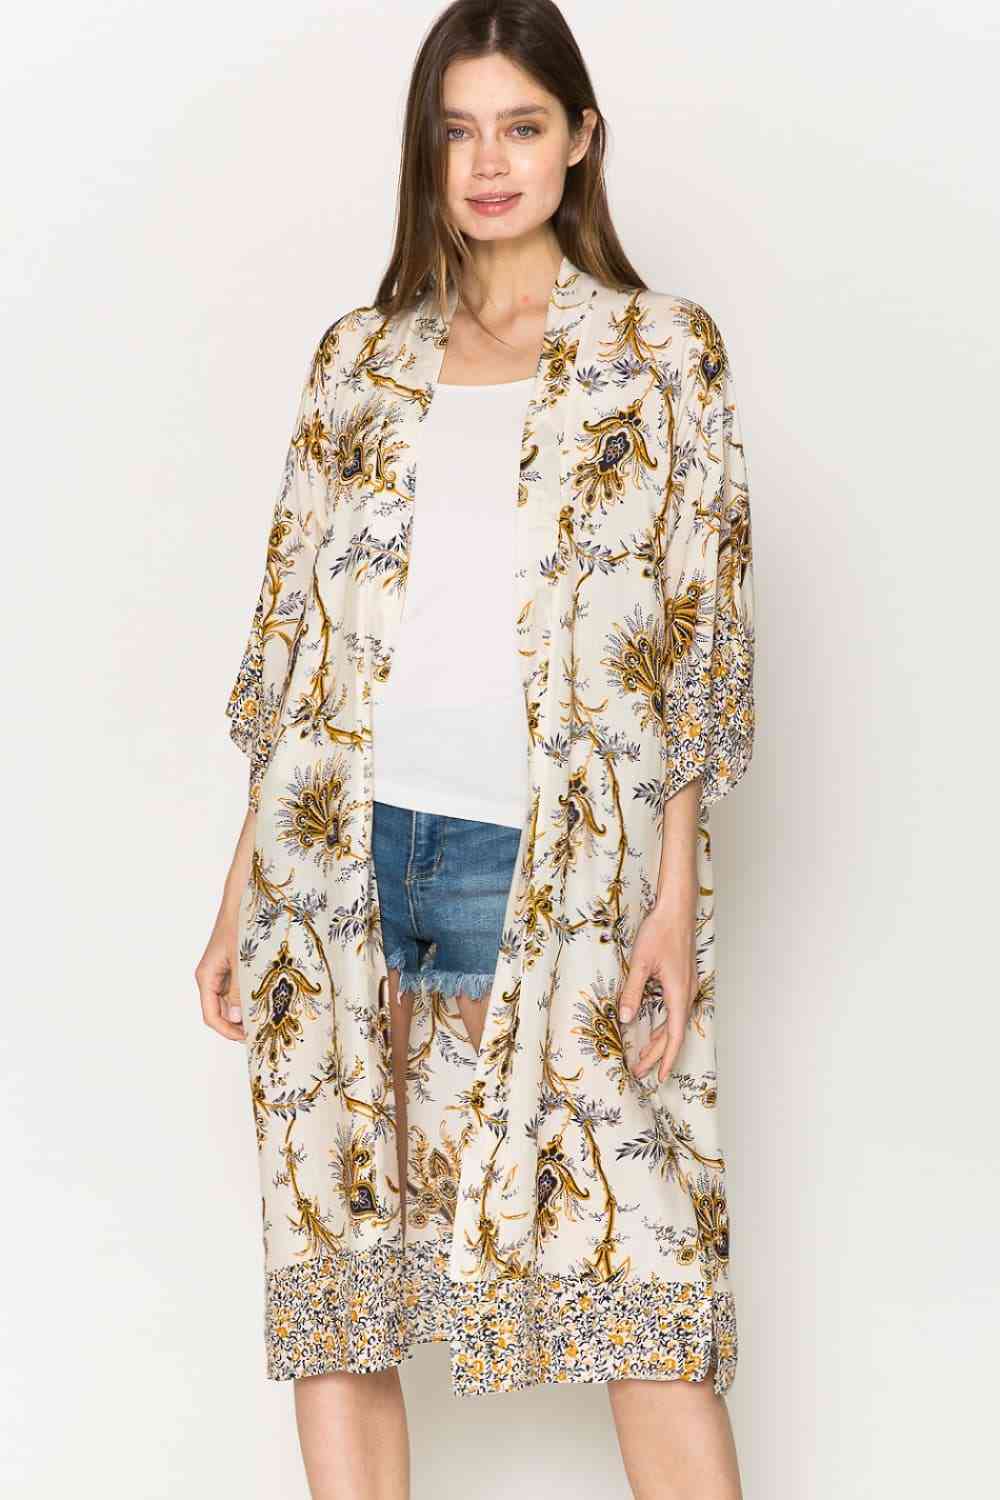 Floral Open Front Slit Duster Cardigan - Floral / One Size - Women’s Clothing & Accessories - Shirts & Tops - 1 - 2024